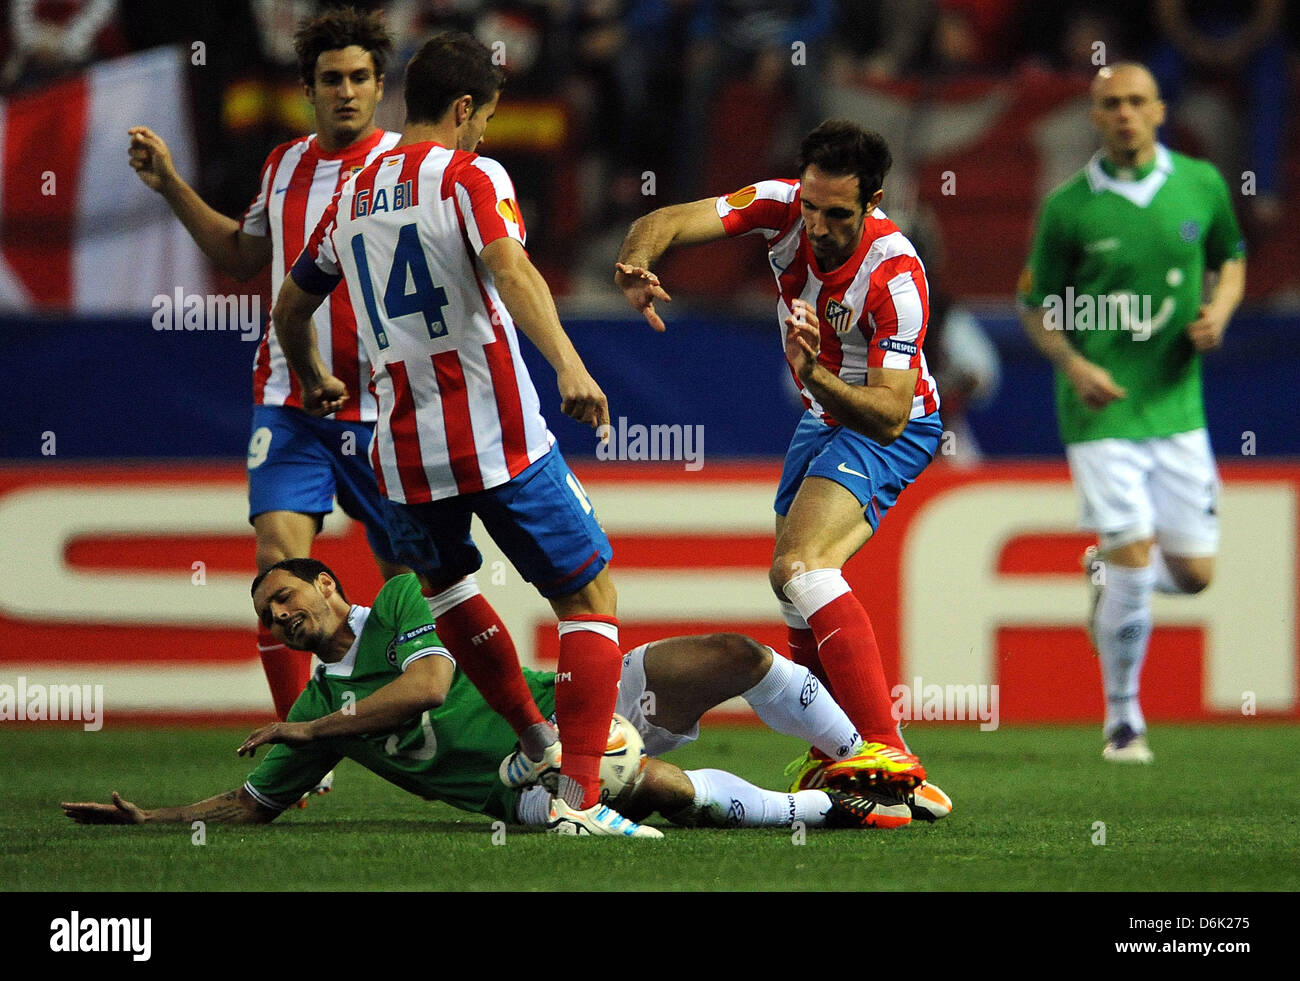 Atletico Madrid's Juanfran (R) and Gabi and Sergio Pinto (down) of Hanover fight for the ball during the UEFA Europa League quarter-final first leg soccer match between Atletico Madrid and Hanover 96 at Vicente Calderon stadium in Madrid, Spain, 29 March 2012. Photo: Peter Steffen dpa/lni  +++(c) dpa - Bildfunk+++ Stock Photo